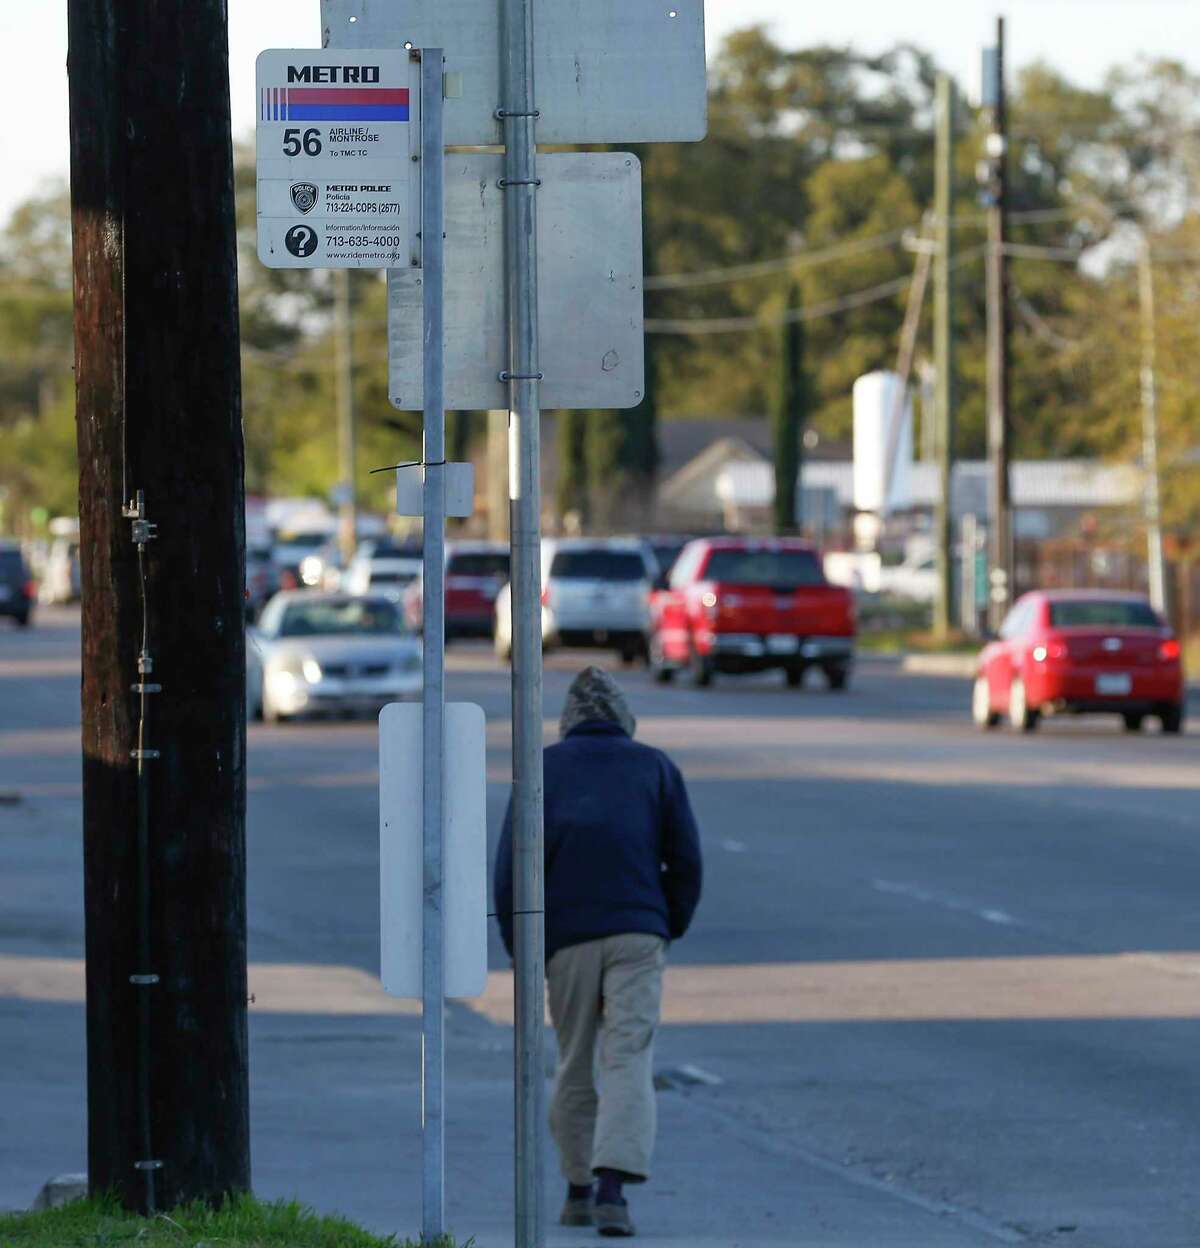 A pedestrian walks by a bus stop at Canino and Airline on Feb. 26, 2020, in Houston. Metropolitan Transit Authority is making changes to the 54 Scott and and 56 Montrose/Airline routes as the first steps to improve 17 corridors with better bus stops, access and traffic signal timing.